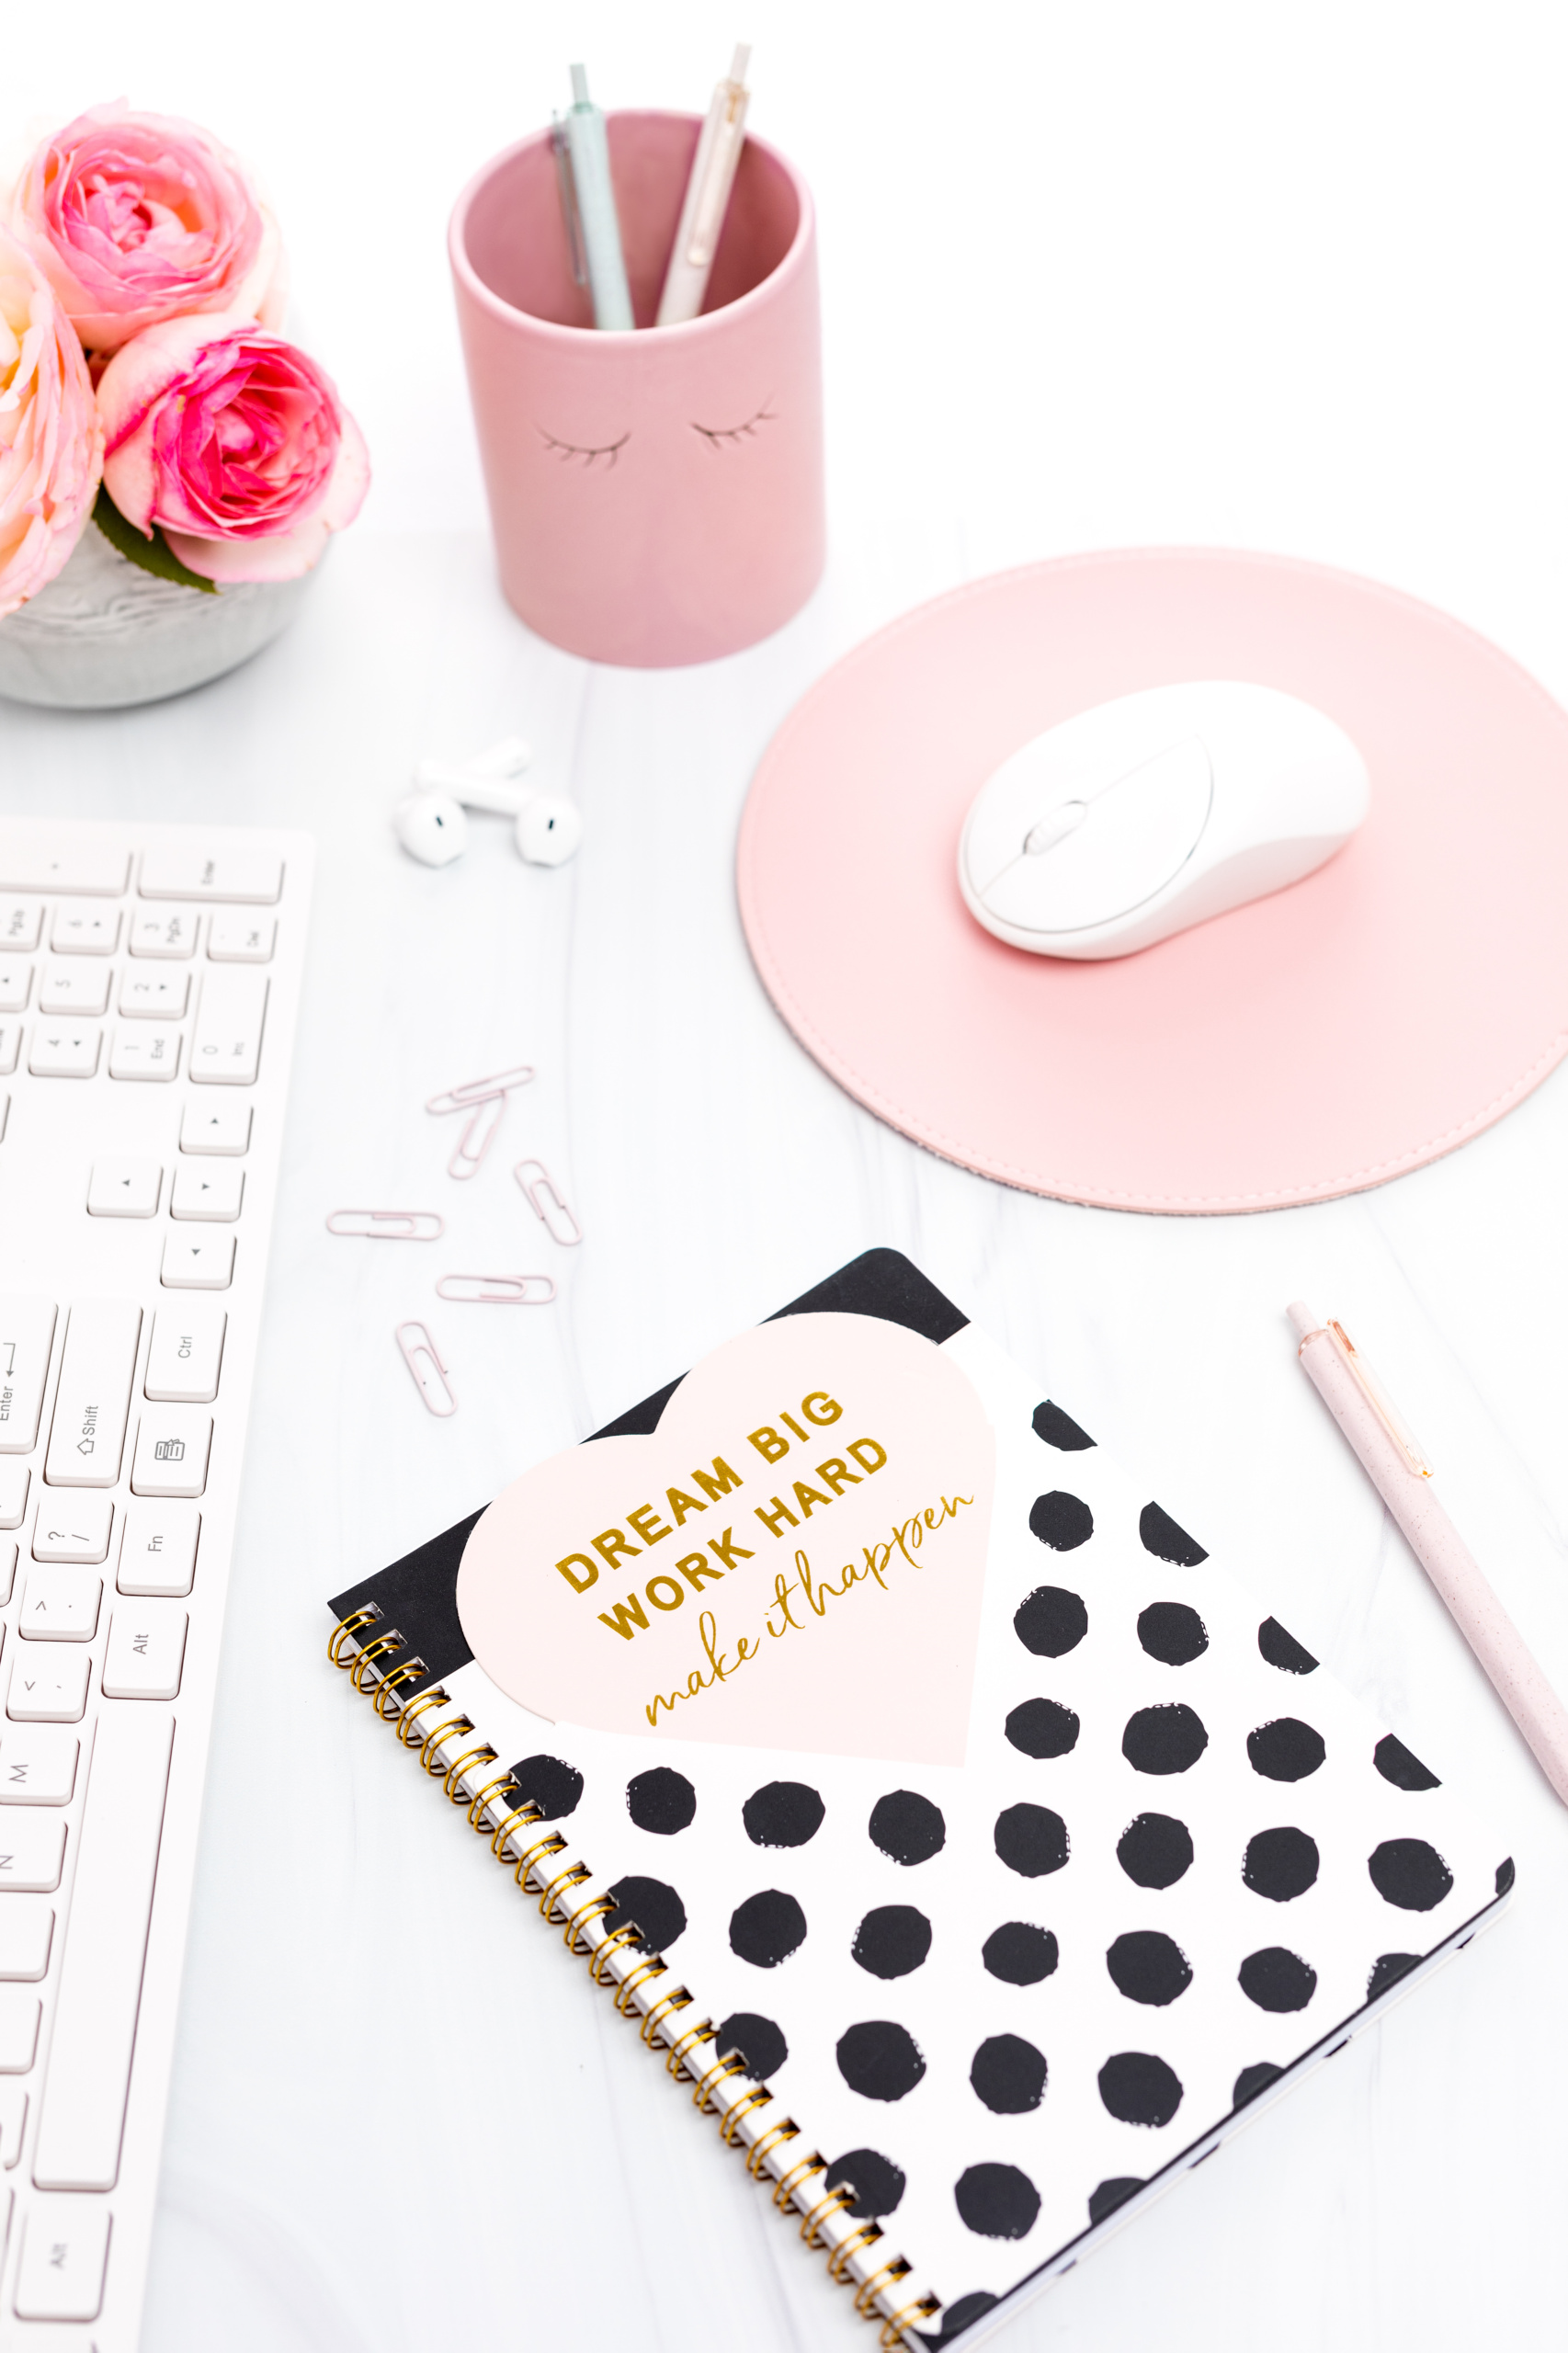 Pink and White Styled Desktop Featuring a Motivational Message